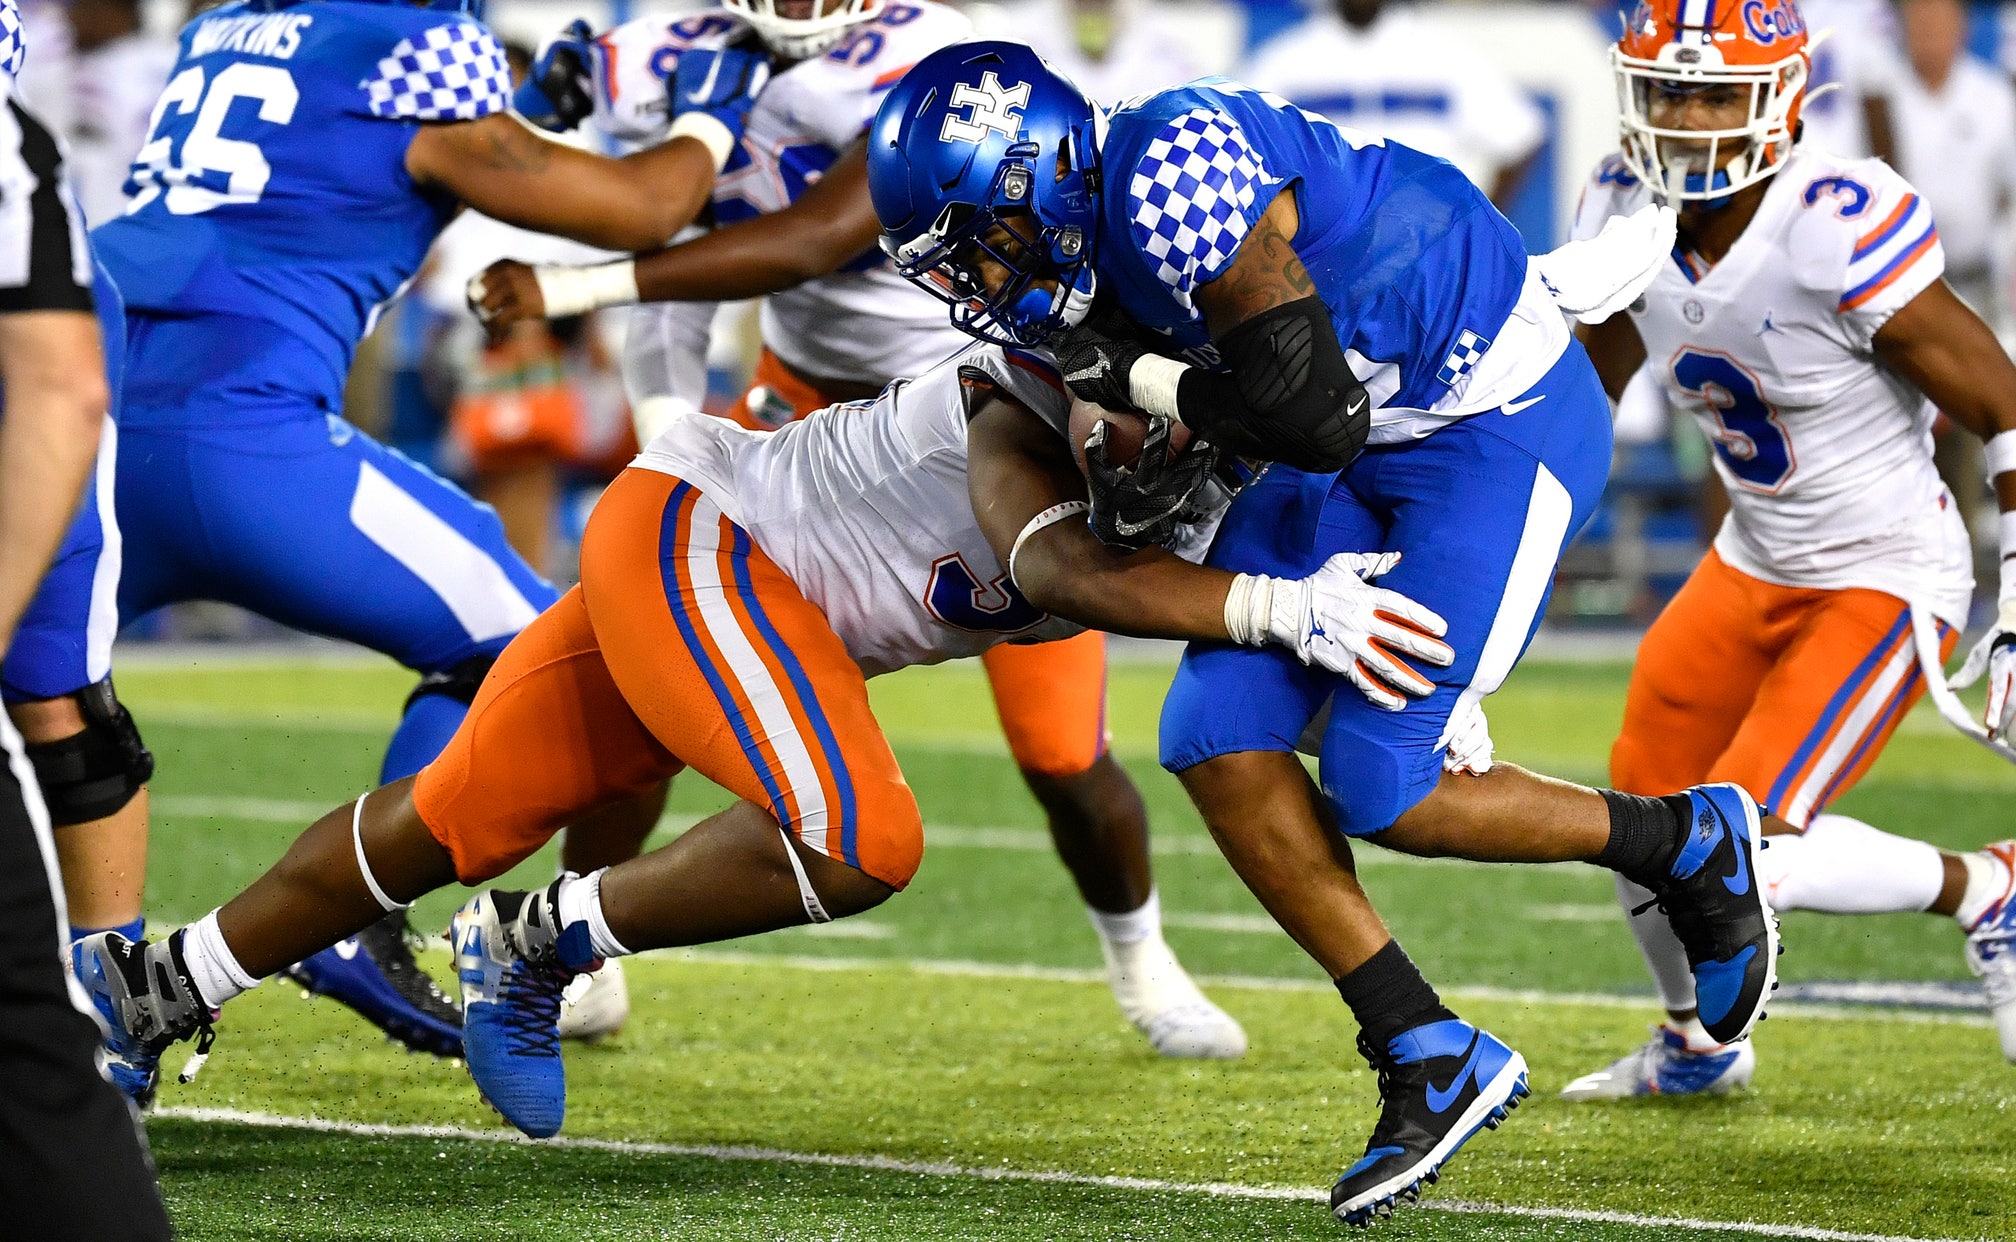 SEC building some of the top defenses in college football FOX Sports